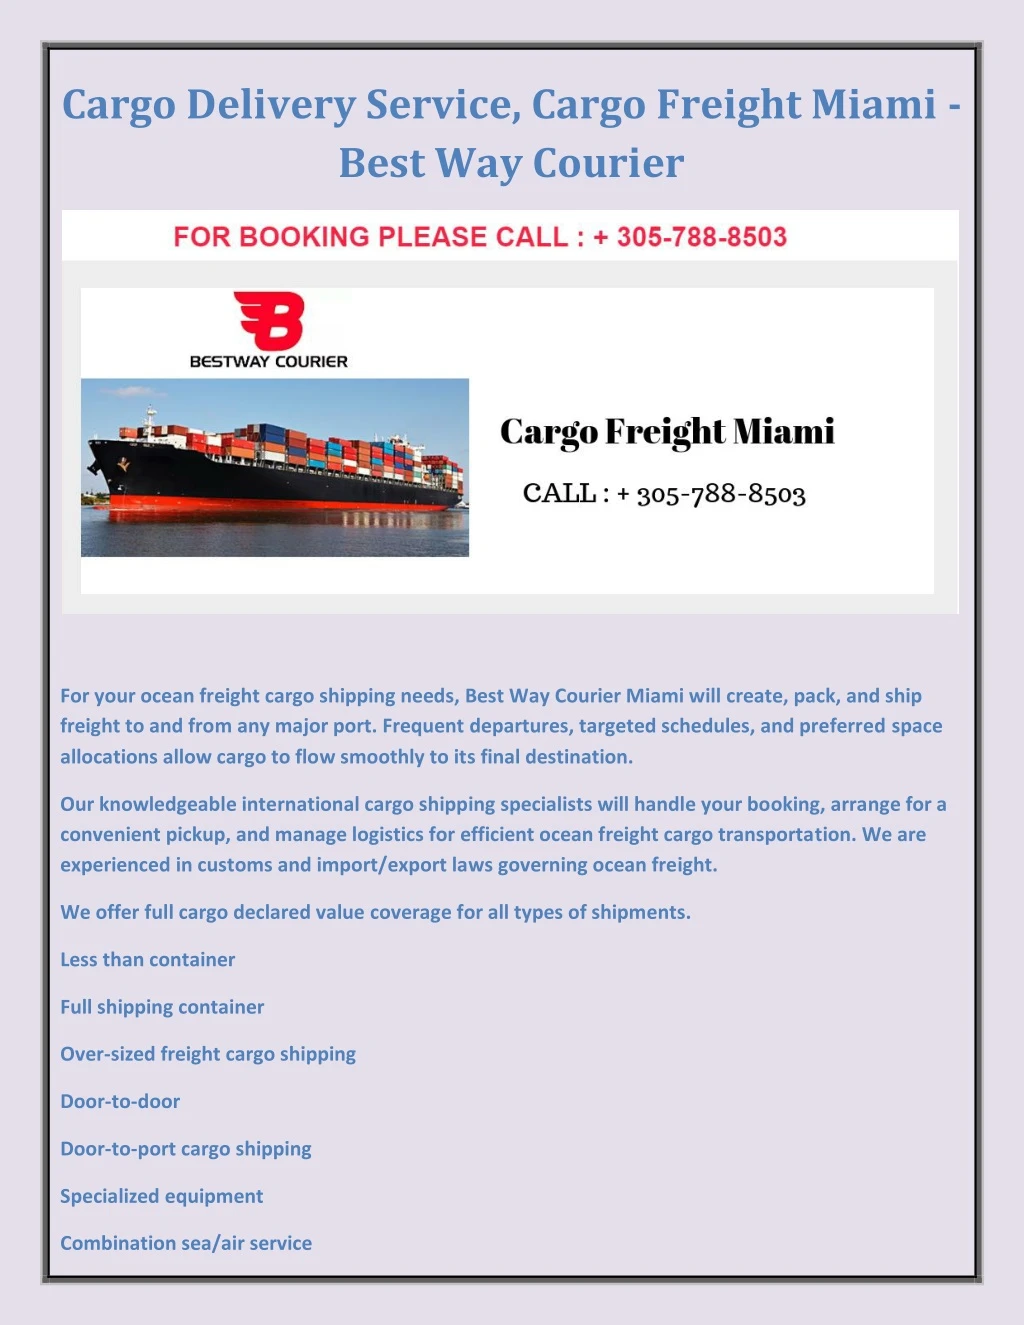 cargo delivery service cargo freight miami best